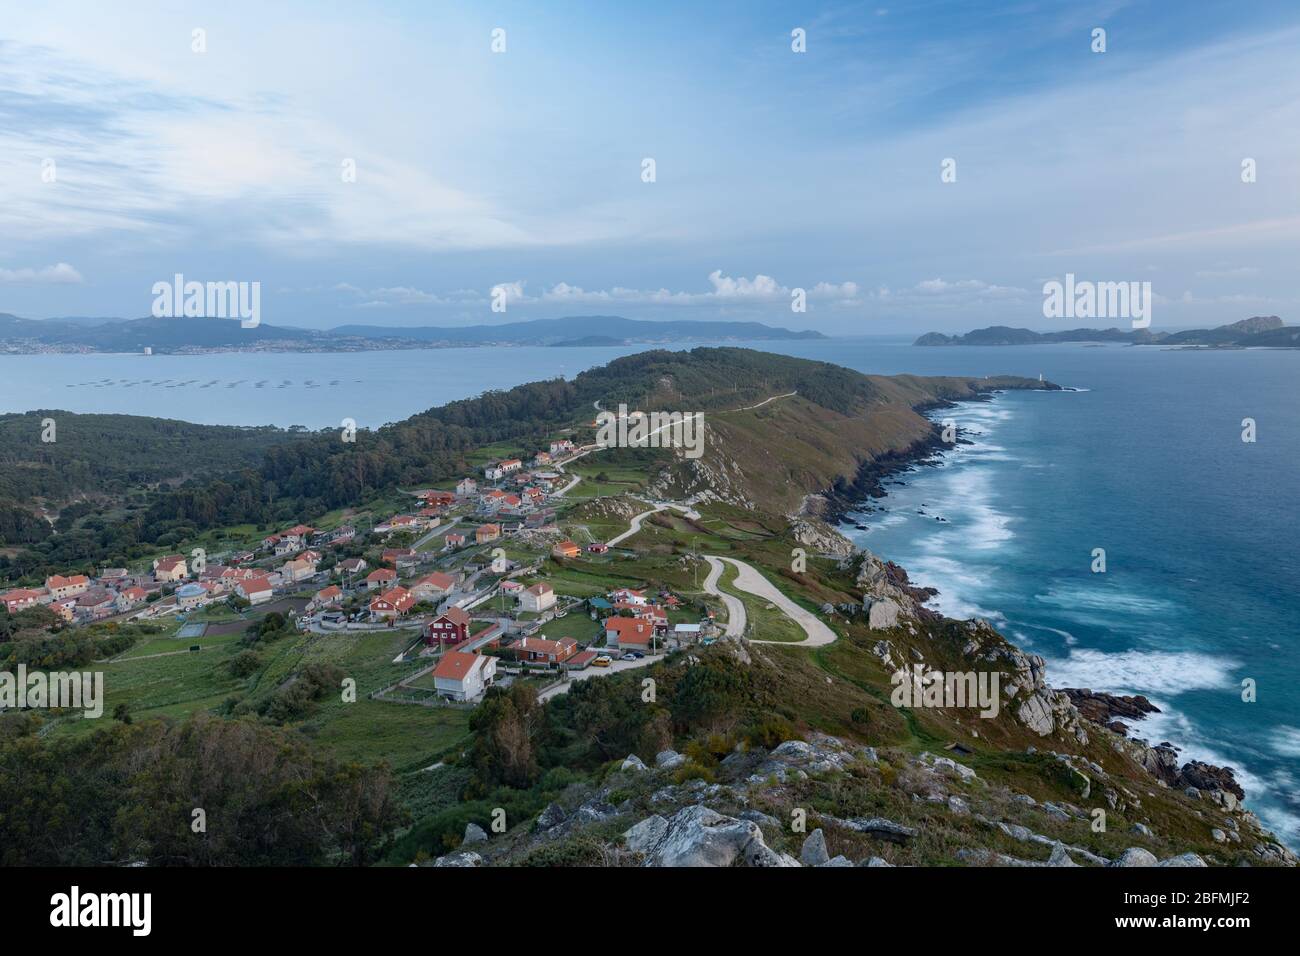 View of the coast of La Vela and the Cies Islands from the O Facho de Donon viewpoint, in Galicia, Spain. Stock Photo